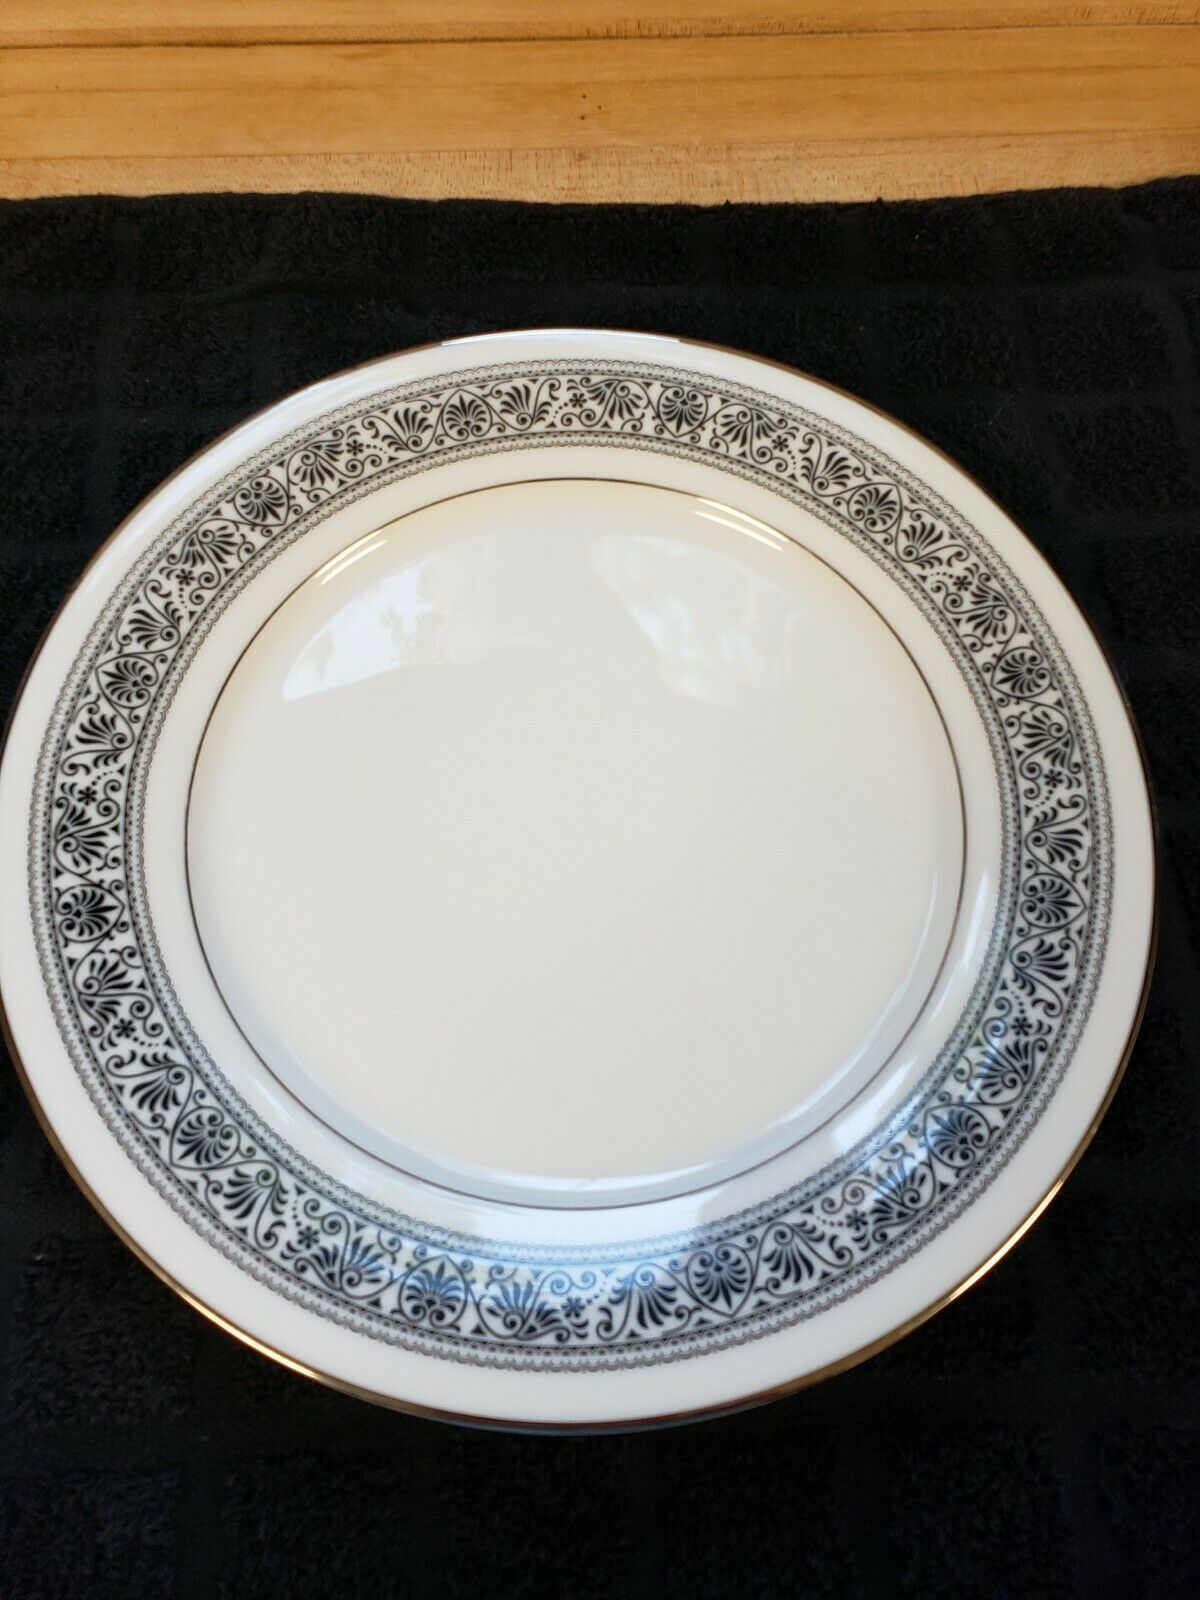 Primary image for Noritake Ivory Prelude 10" Dinner Plates (5)